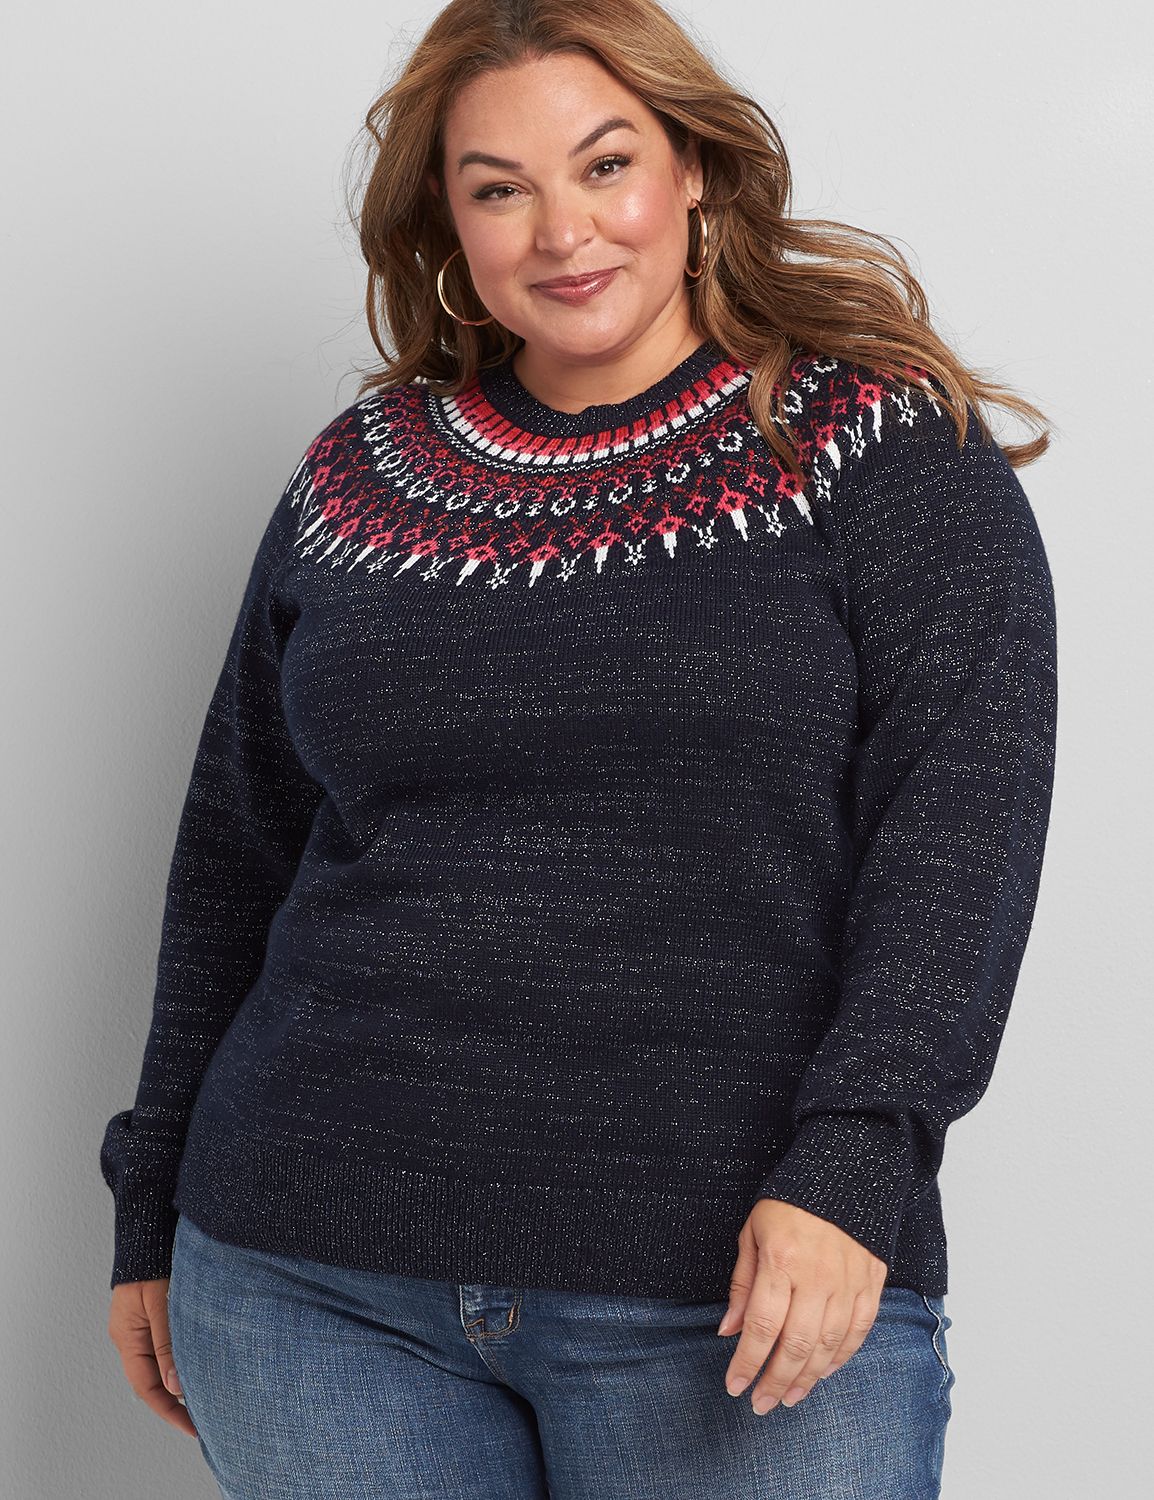 Plus Size Women's Pullover Sweaters 